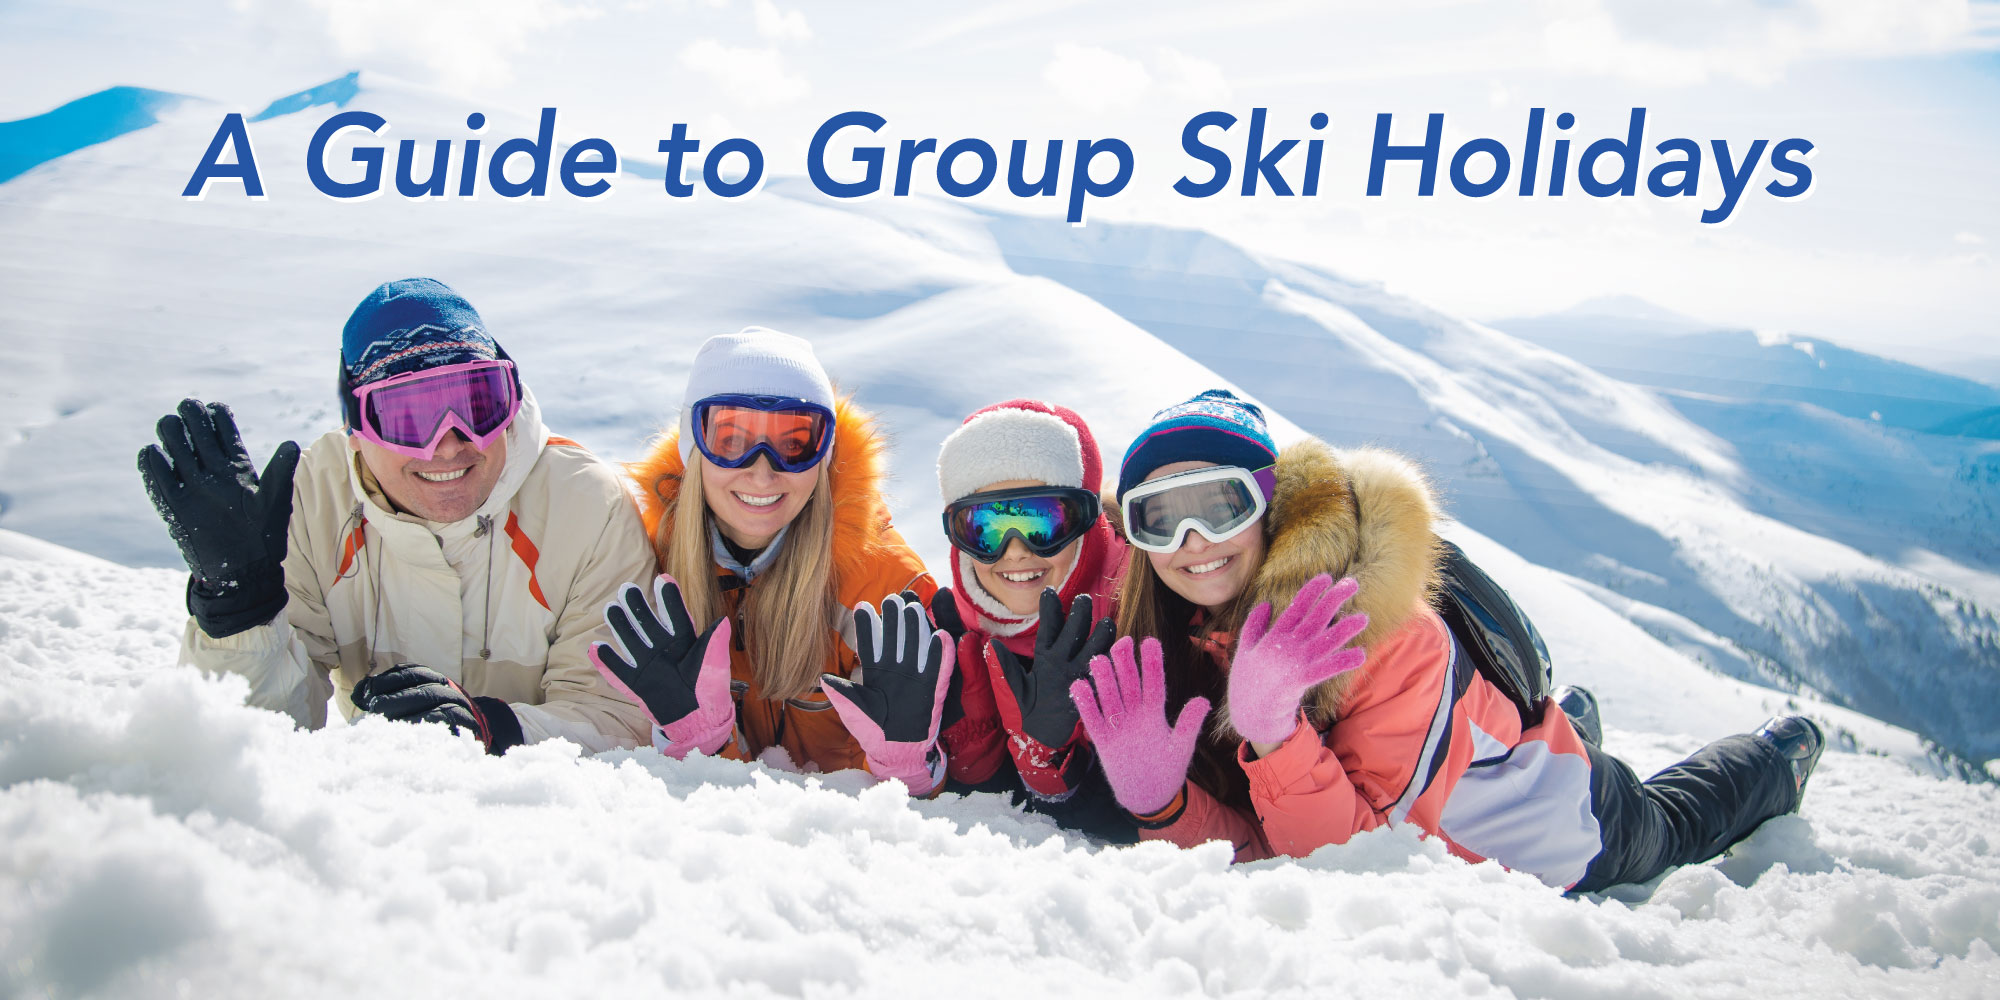 A group of friends on a ski holiday